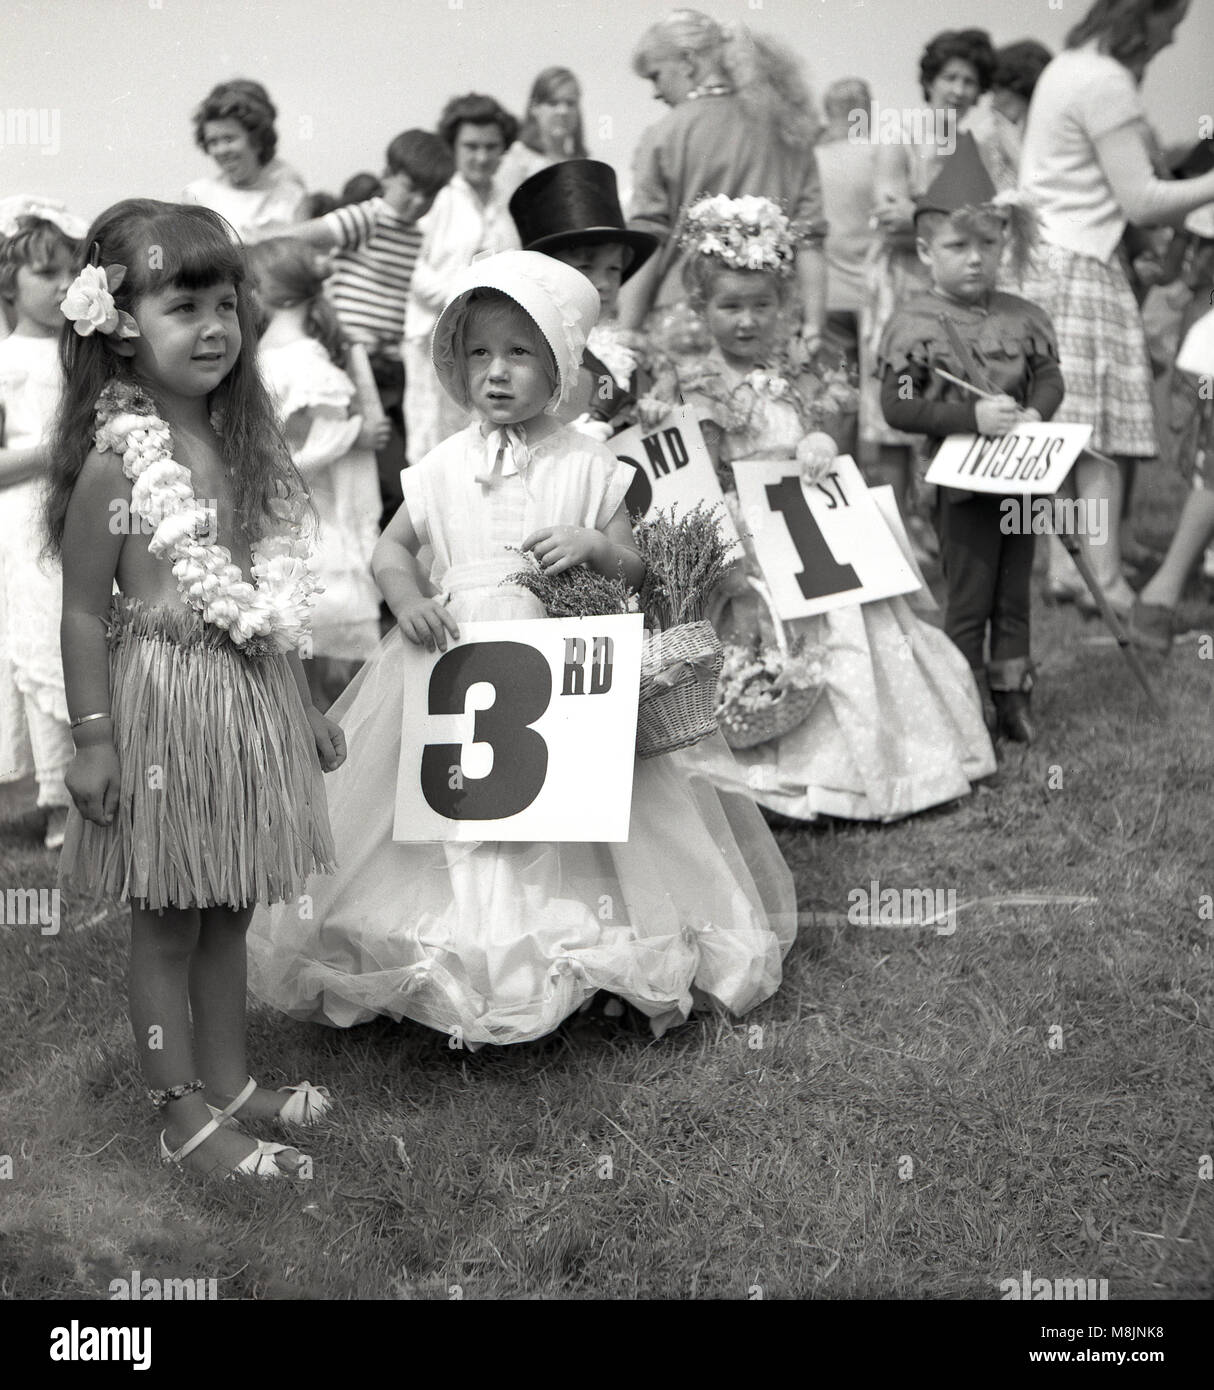 1950s, historical, young children taking part in a fancy dress competition at an outdoor fete, stand together holding their placings after the judging, England, UK. Stock Photo